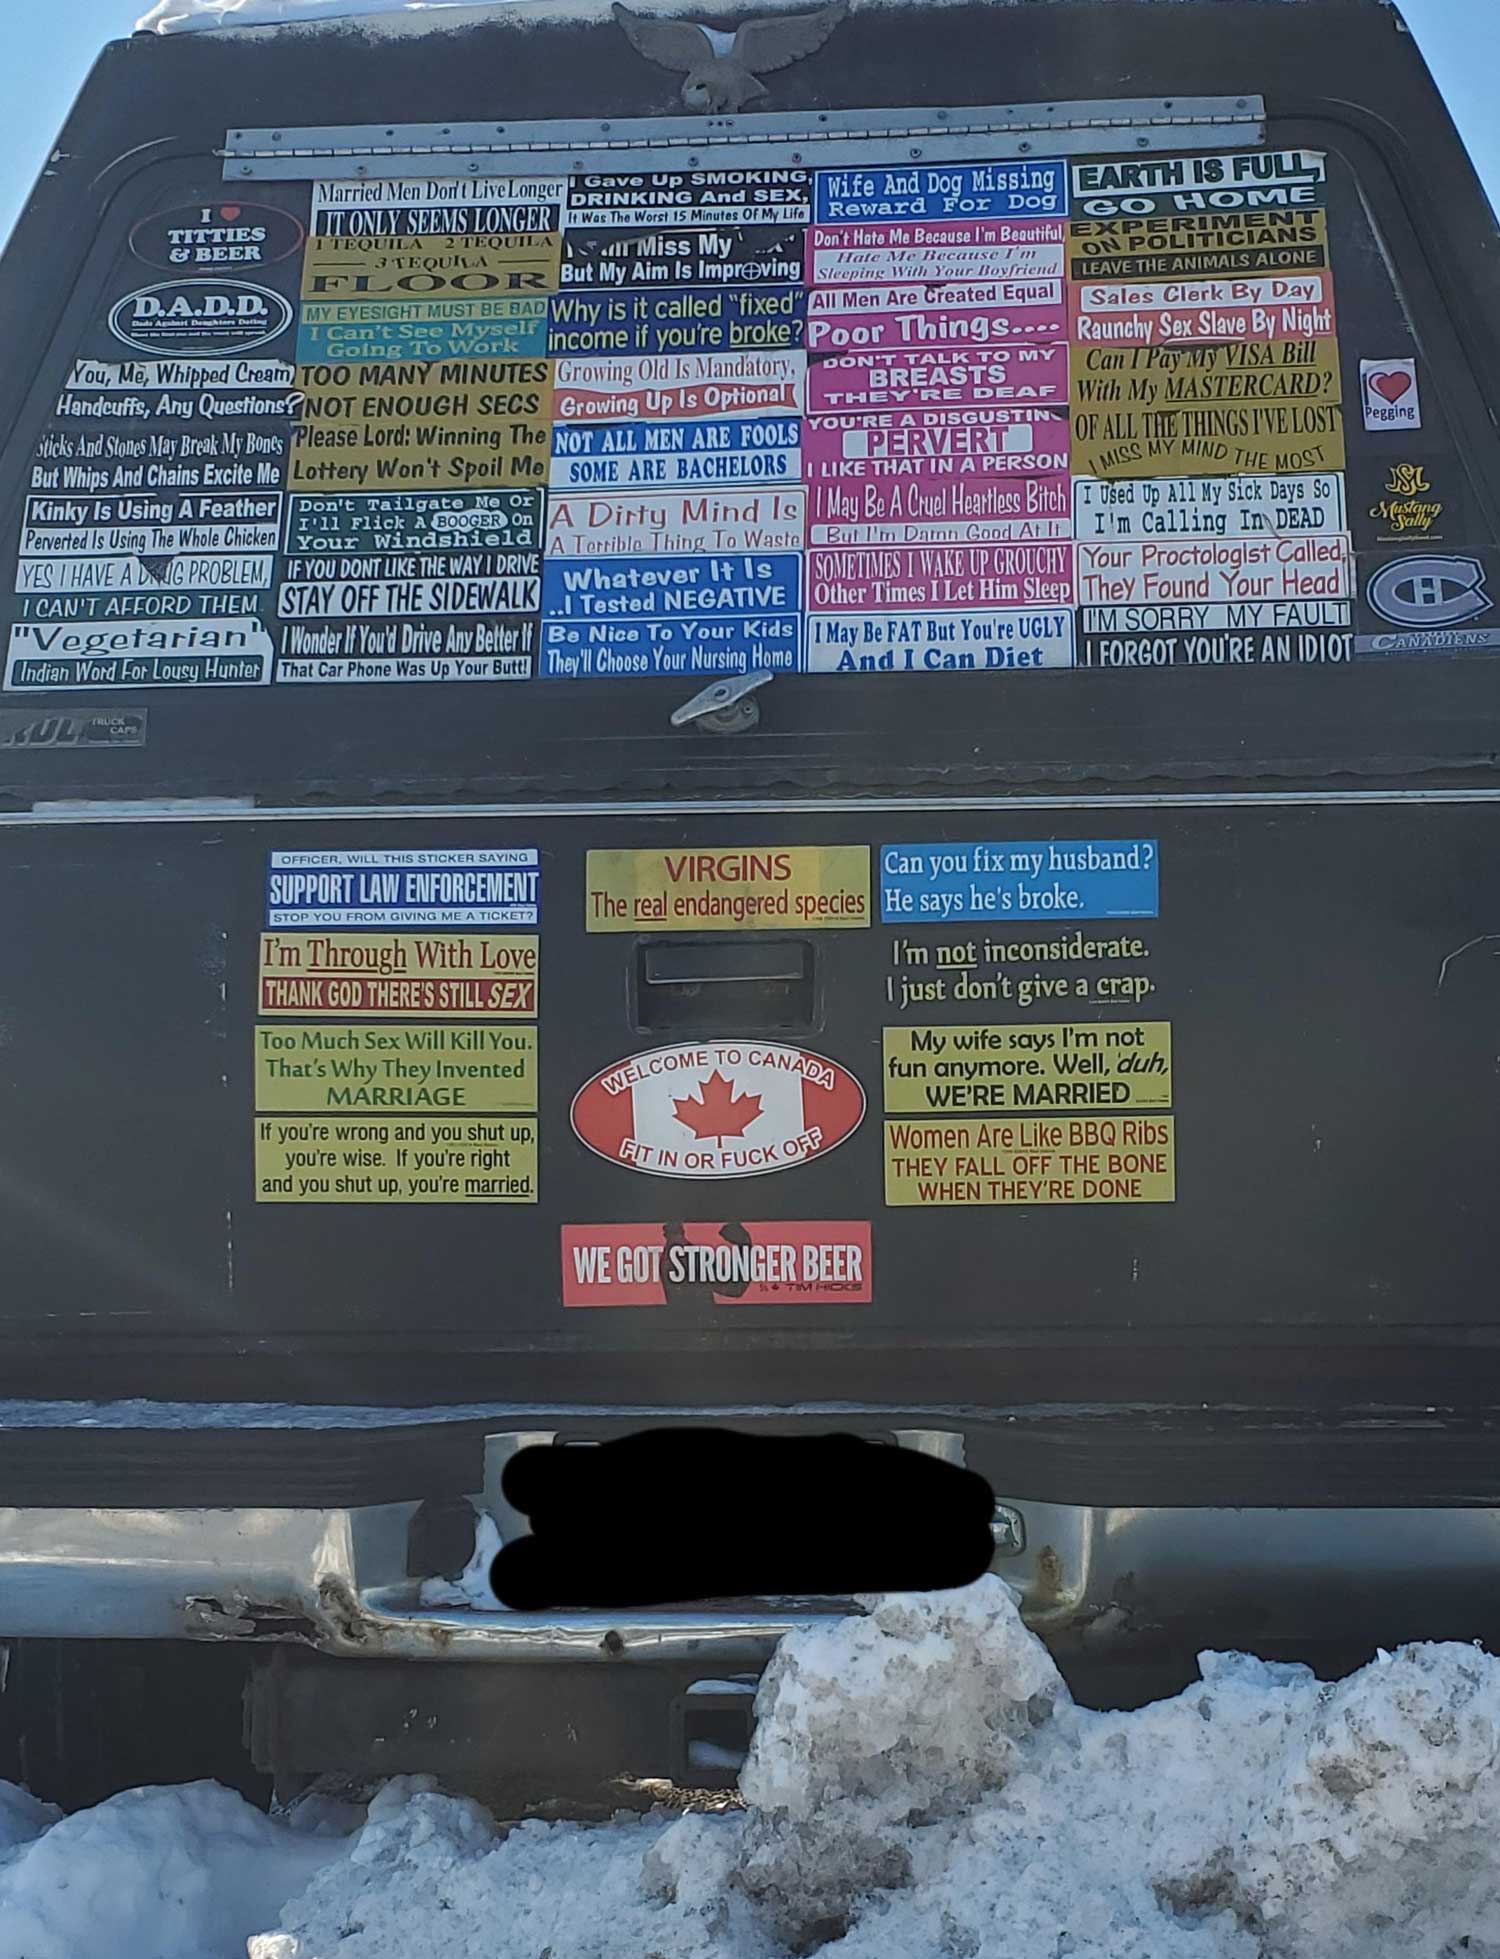 Walked by this truck full of interesting bumper stickers today